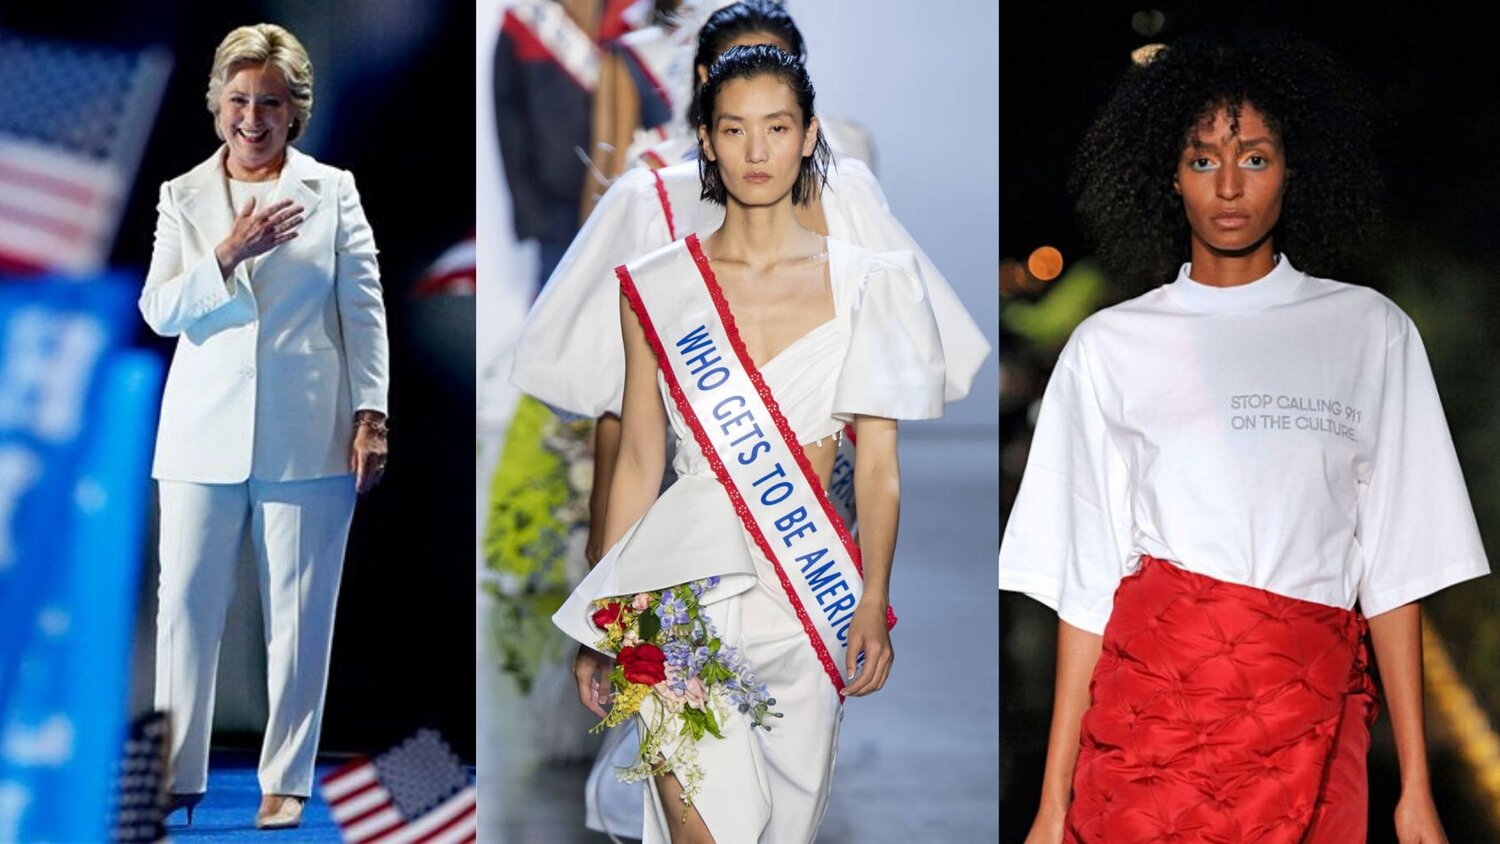 Left: To voters, Clinton’s pantsuits show her respect for American business and female entrepreneurship. Center: Prabal Gurung poses a political question to the U.S. Government in his Spring 2020 runway show. Right: Pyer Moss calls out racism and po…